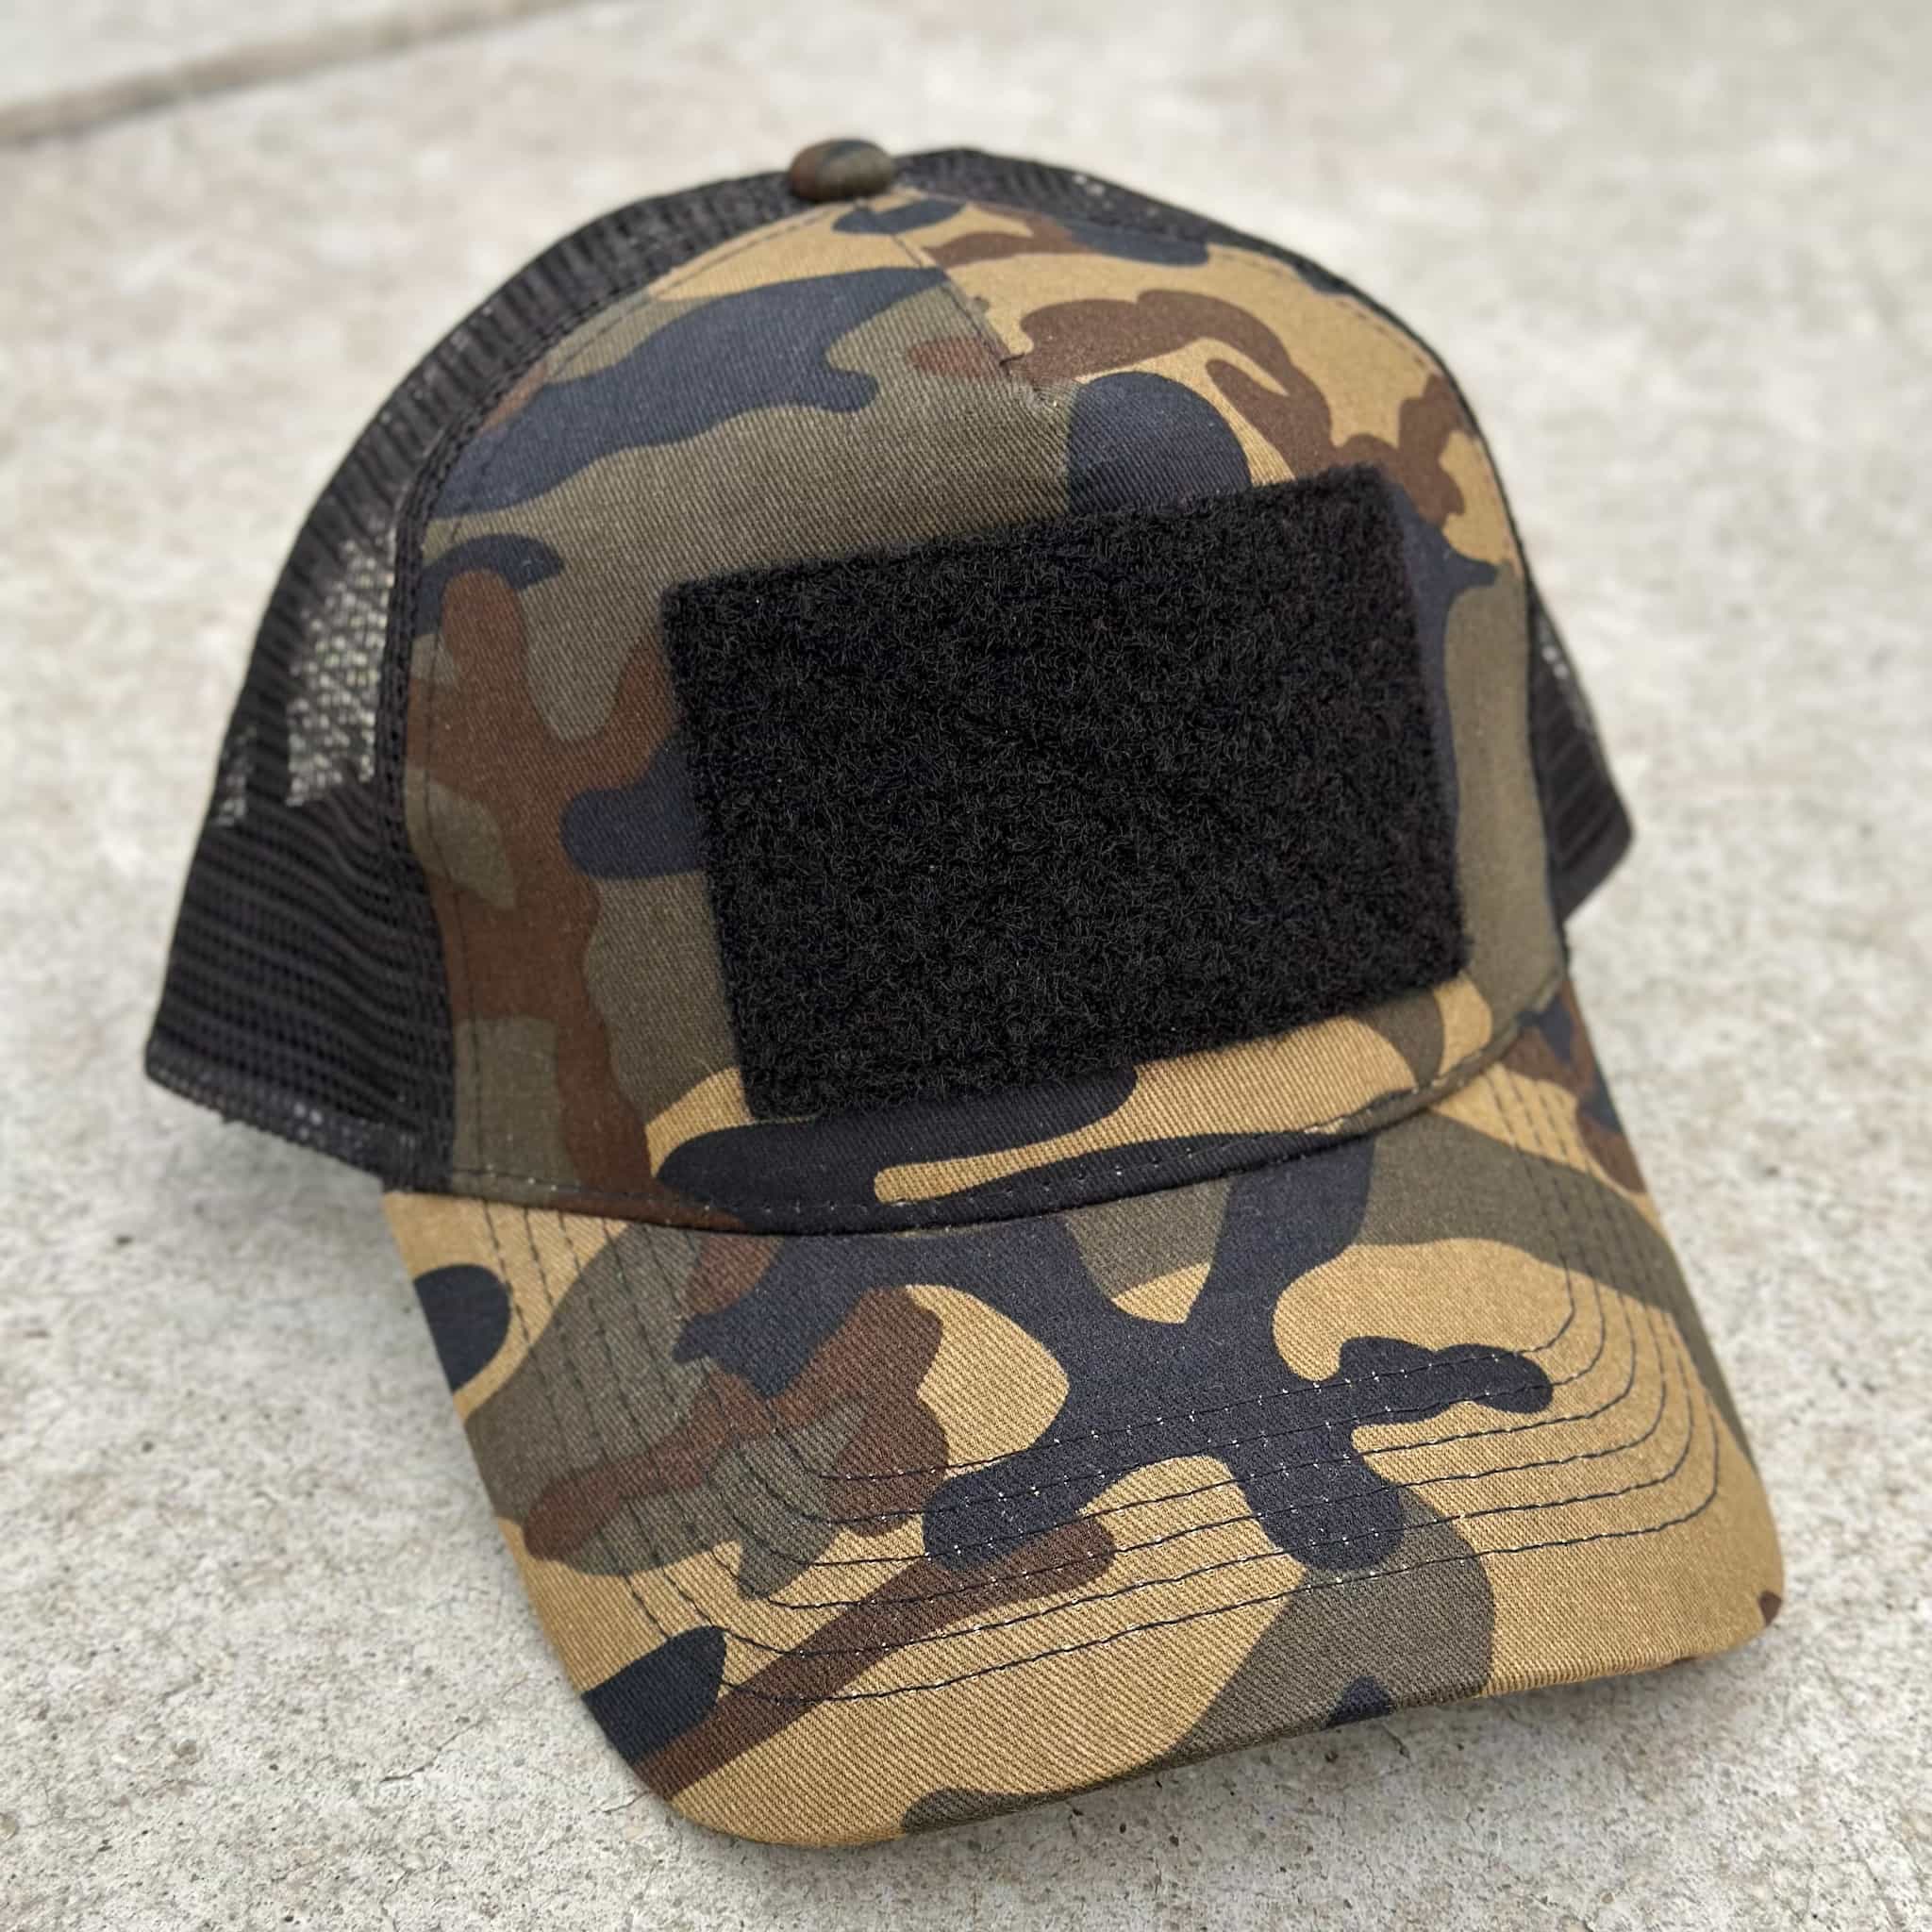 The Blank Canvas Snapback Cap in camo color with large hook-and-loop area on the front